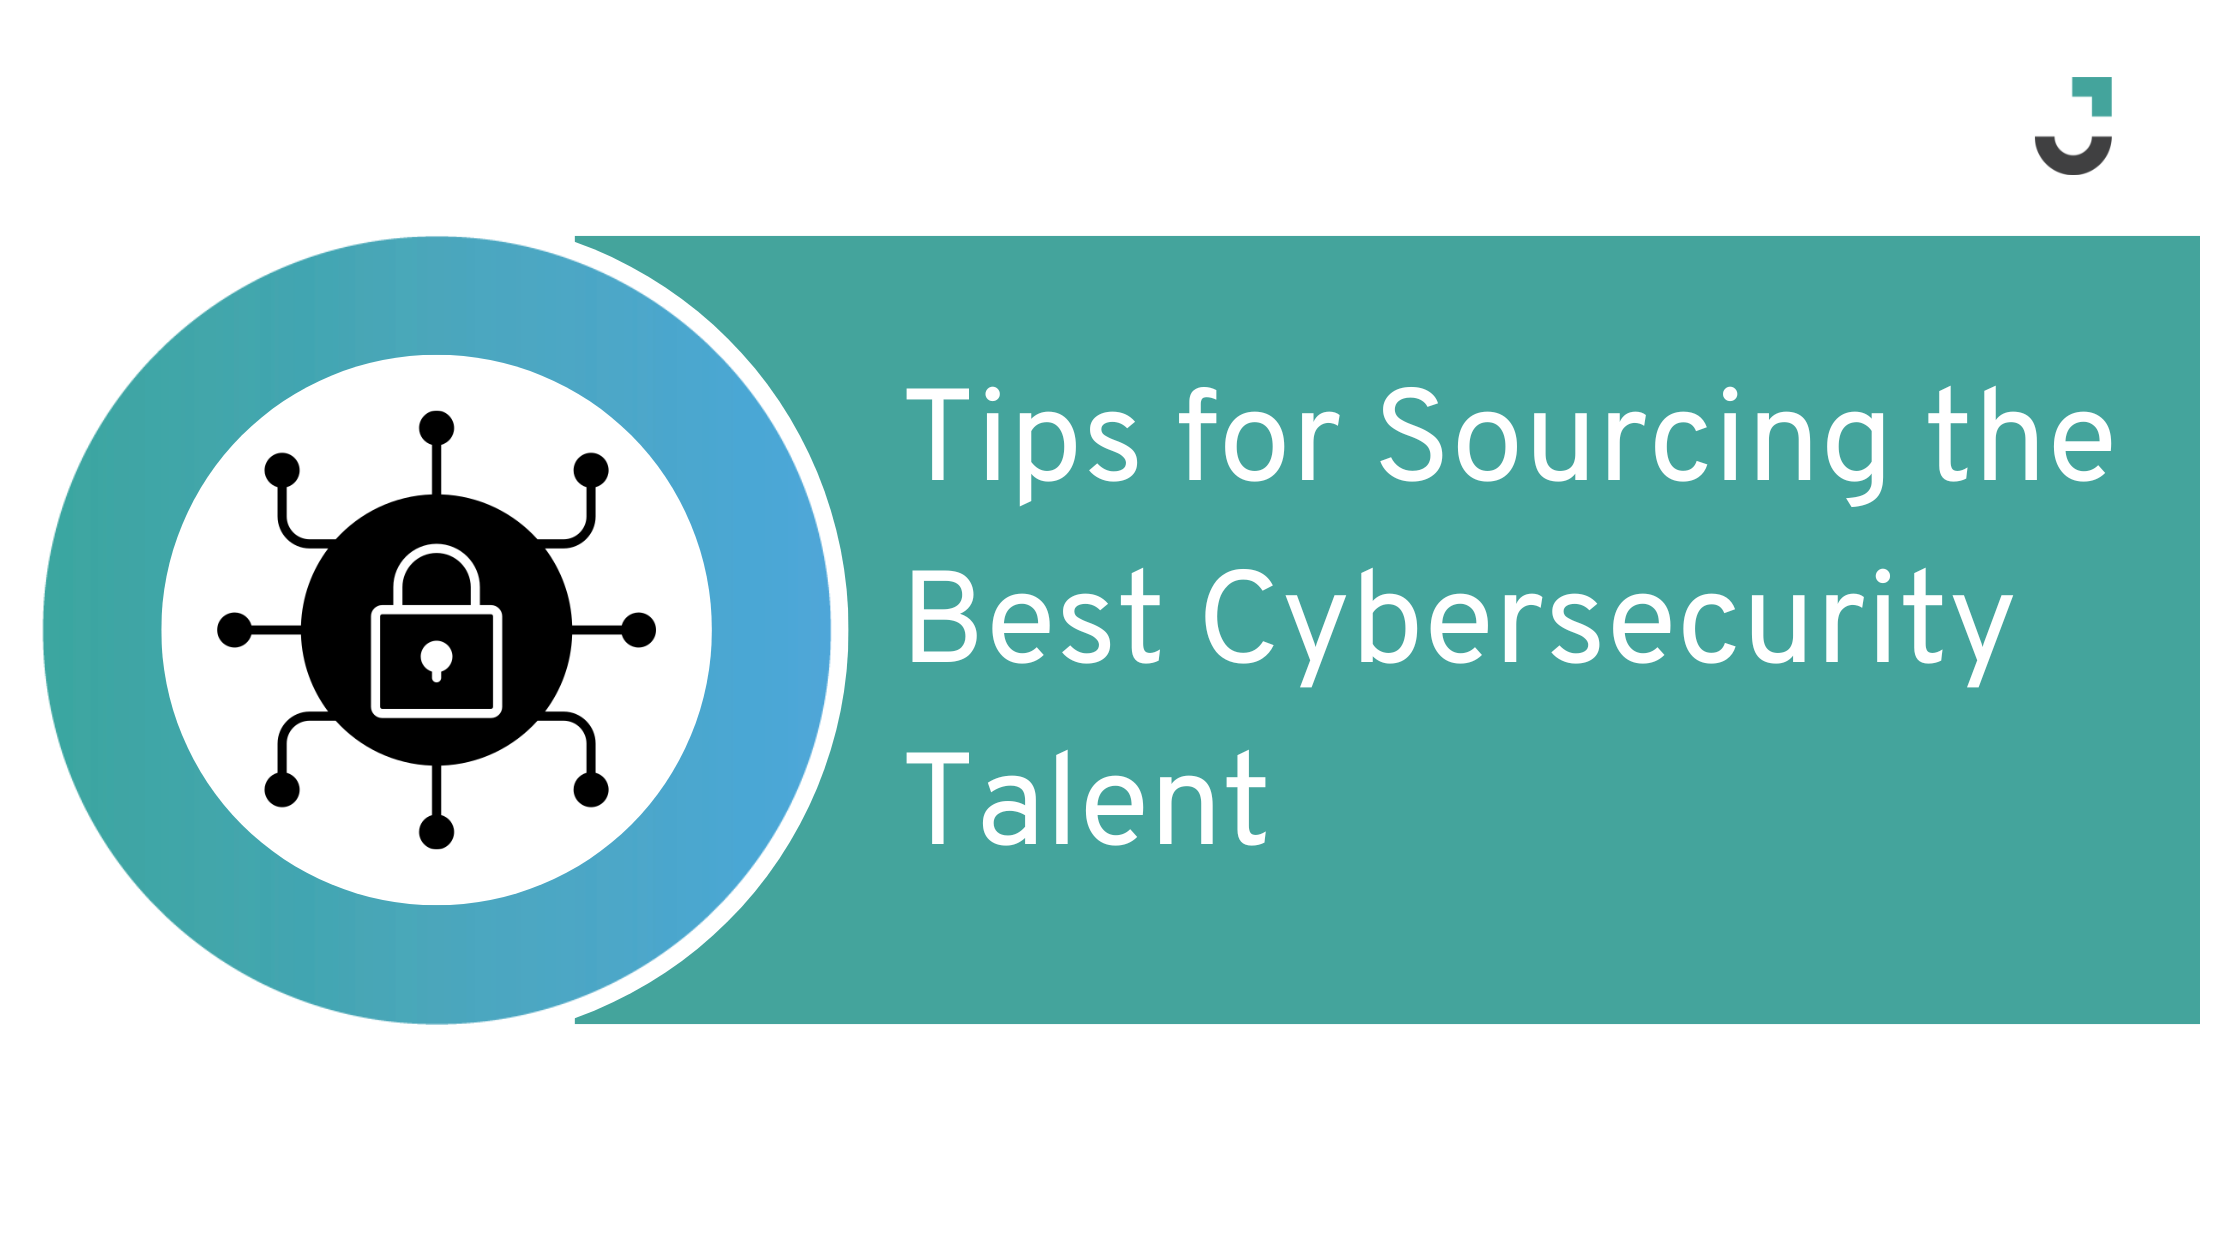 Tips for Sourcing the Best Cybersecurity Talent